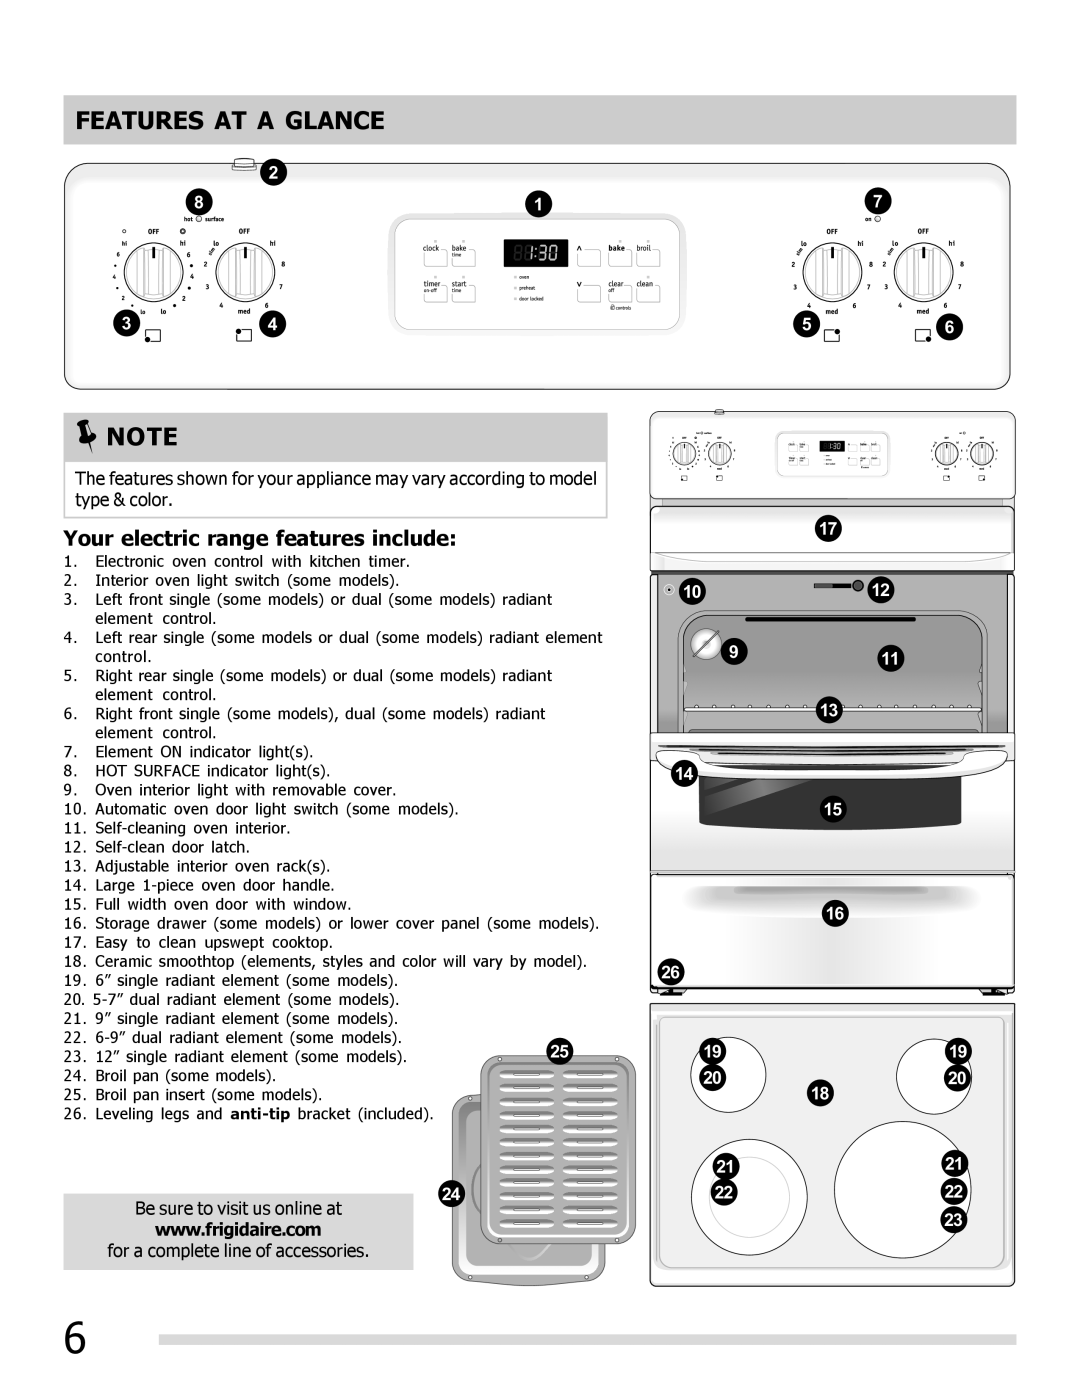 Frigidaire FFEF3018LB, FFEF3017LB, FFEF3017LS, FFEF3018LW manual Features At A Glance, Your electric range features include 